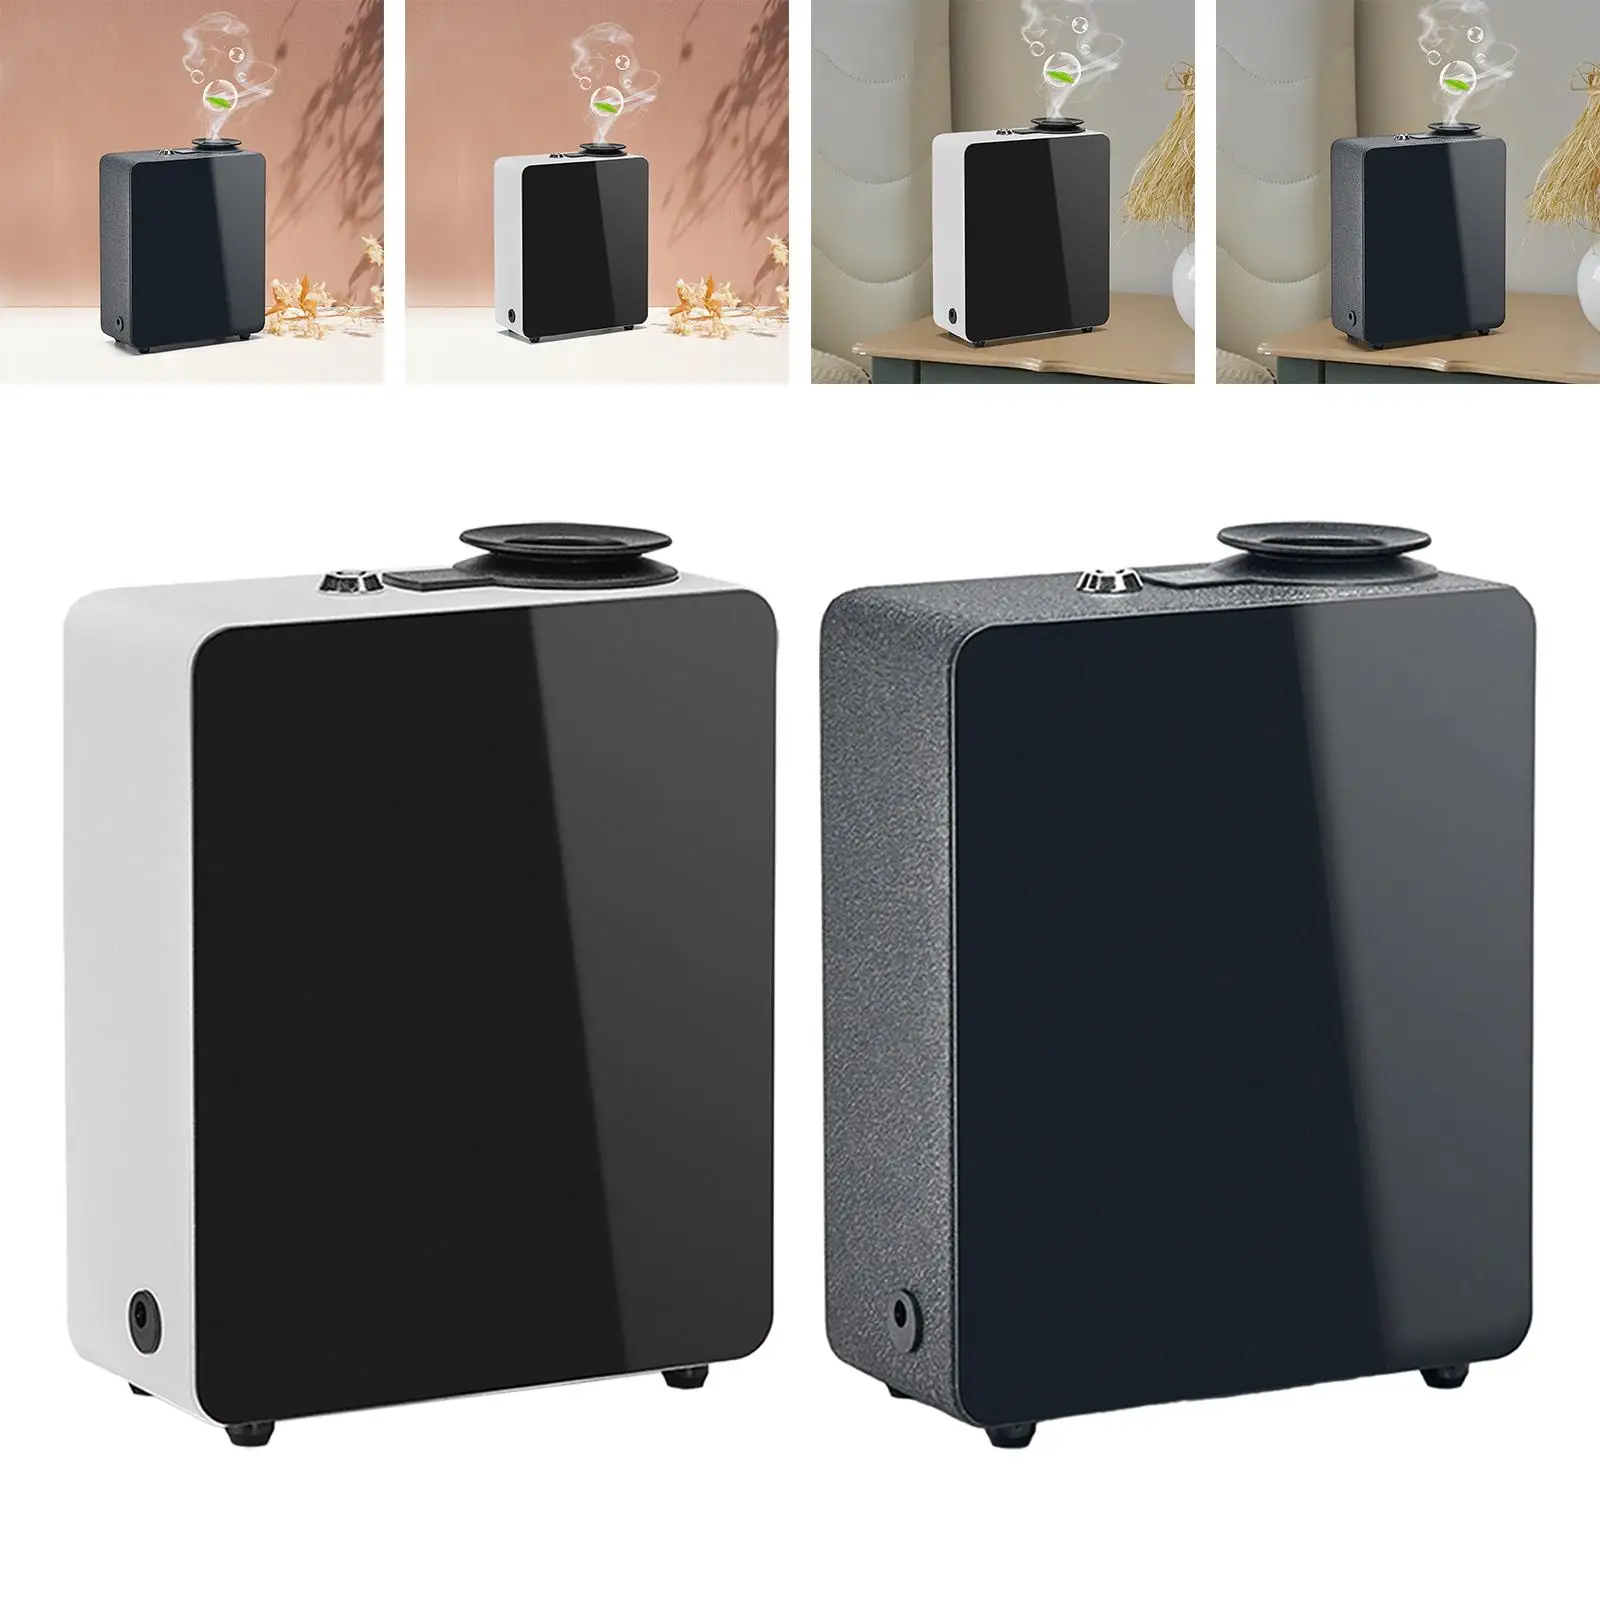 Diffusers for Essential Oils Free Standing Lightweight for Home Yoga Hotel